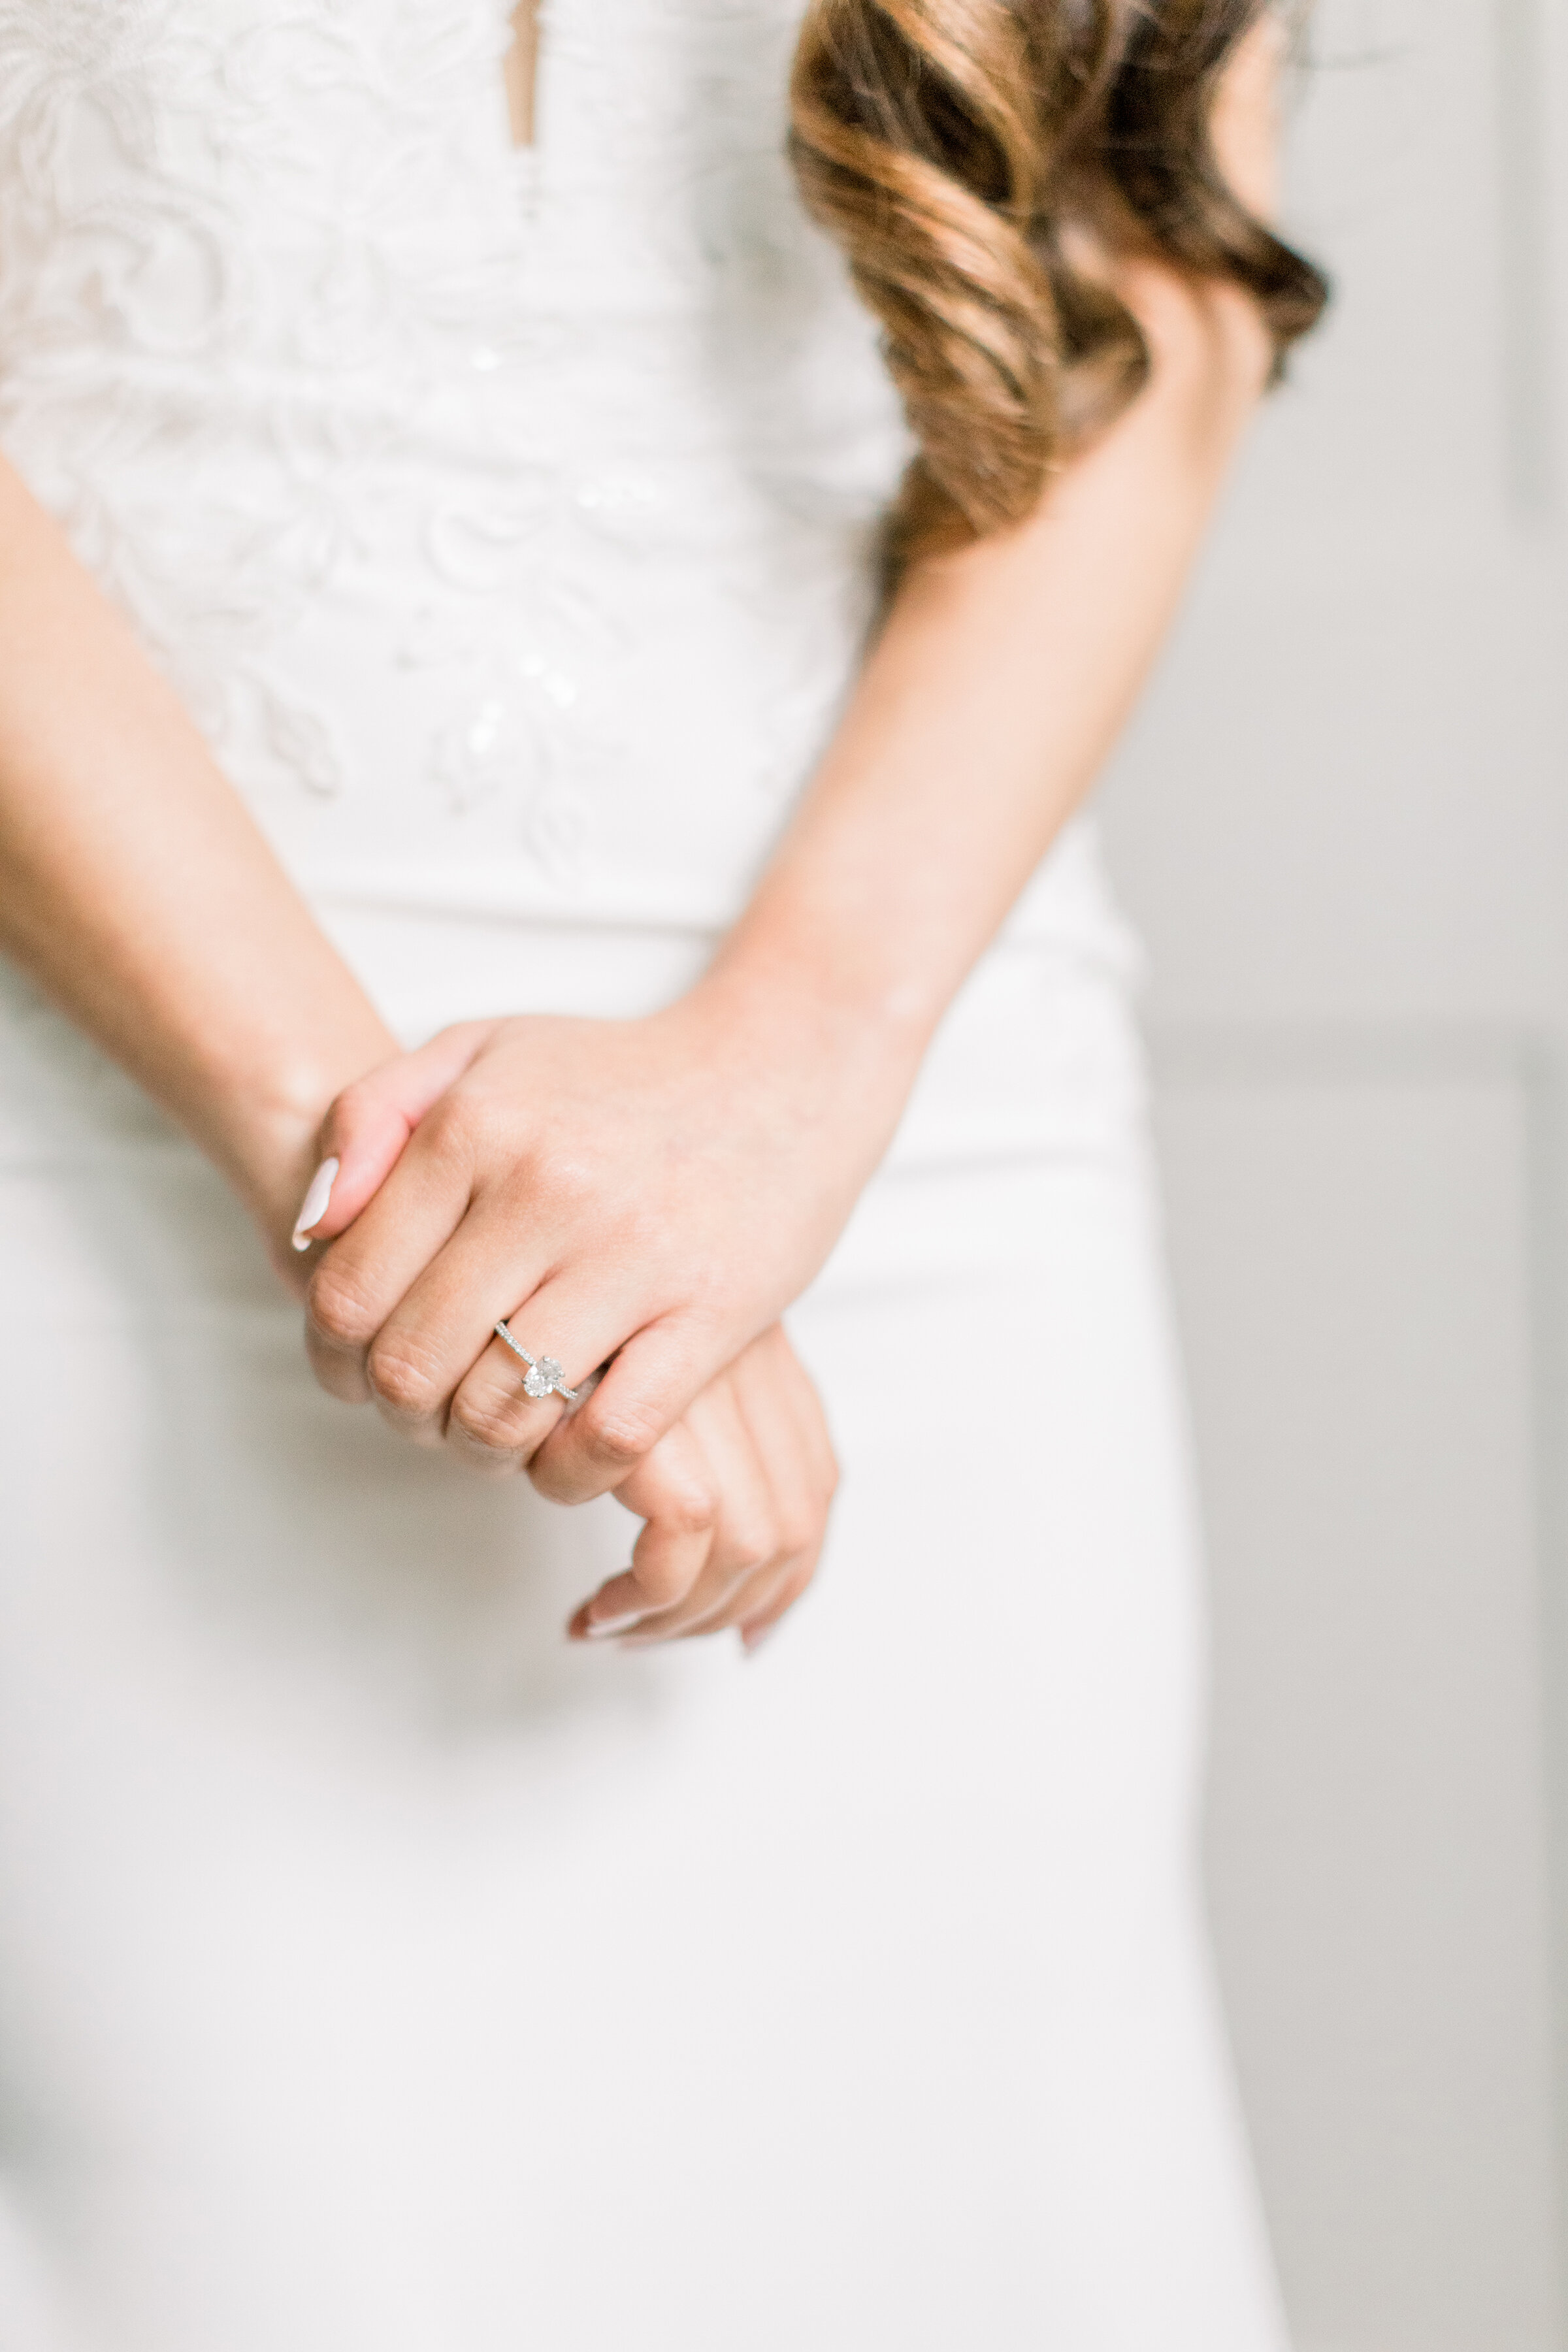  A beautiful bride holds her hands as she shows her simple and stunning ring as her ringleted hair falls on her arm in a stunning close up wedding session by Chelsea Mason Photography in Stonefields Estates, Ottawa. Wedding pose inspiration just the 